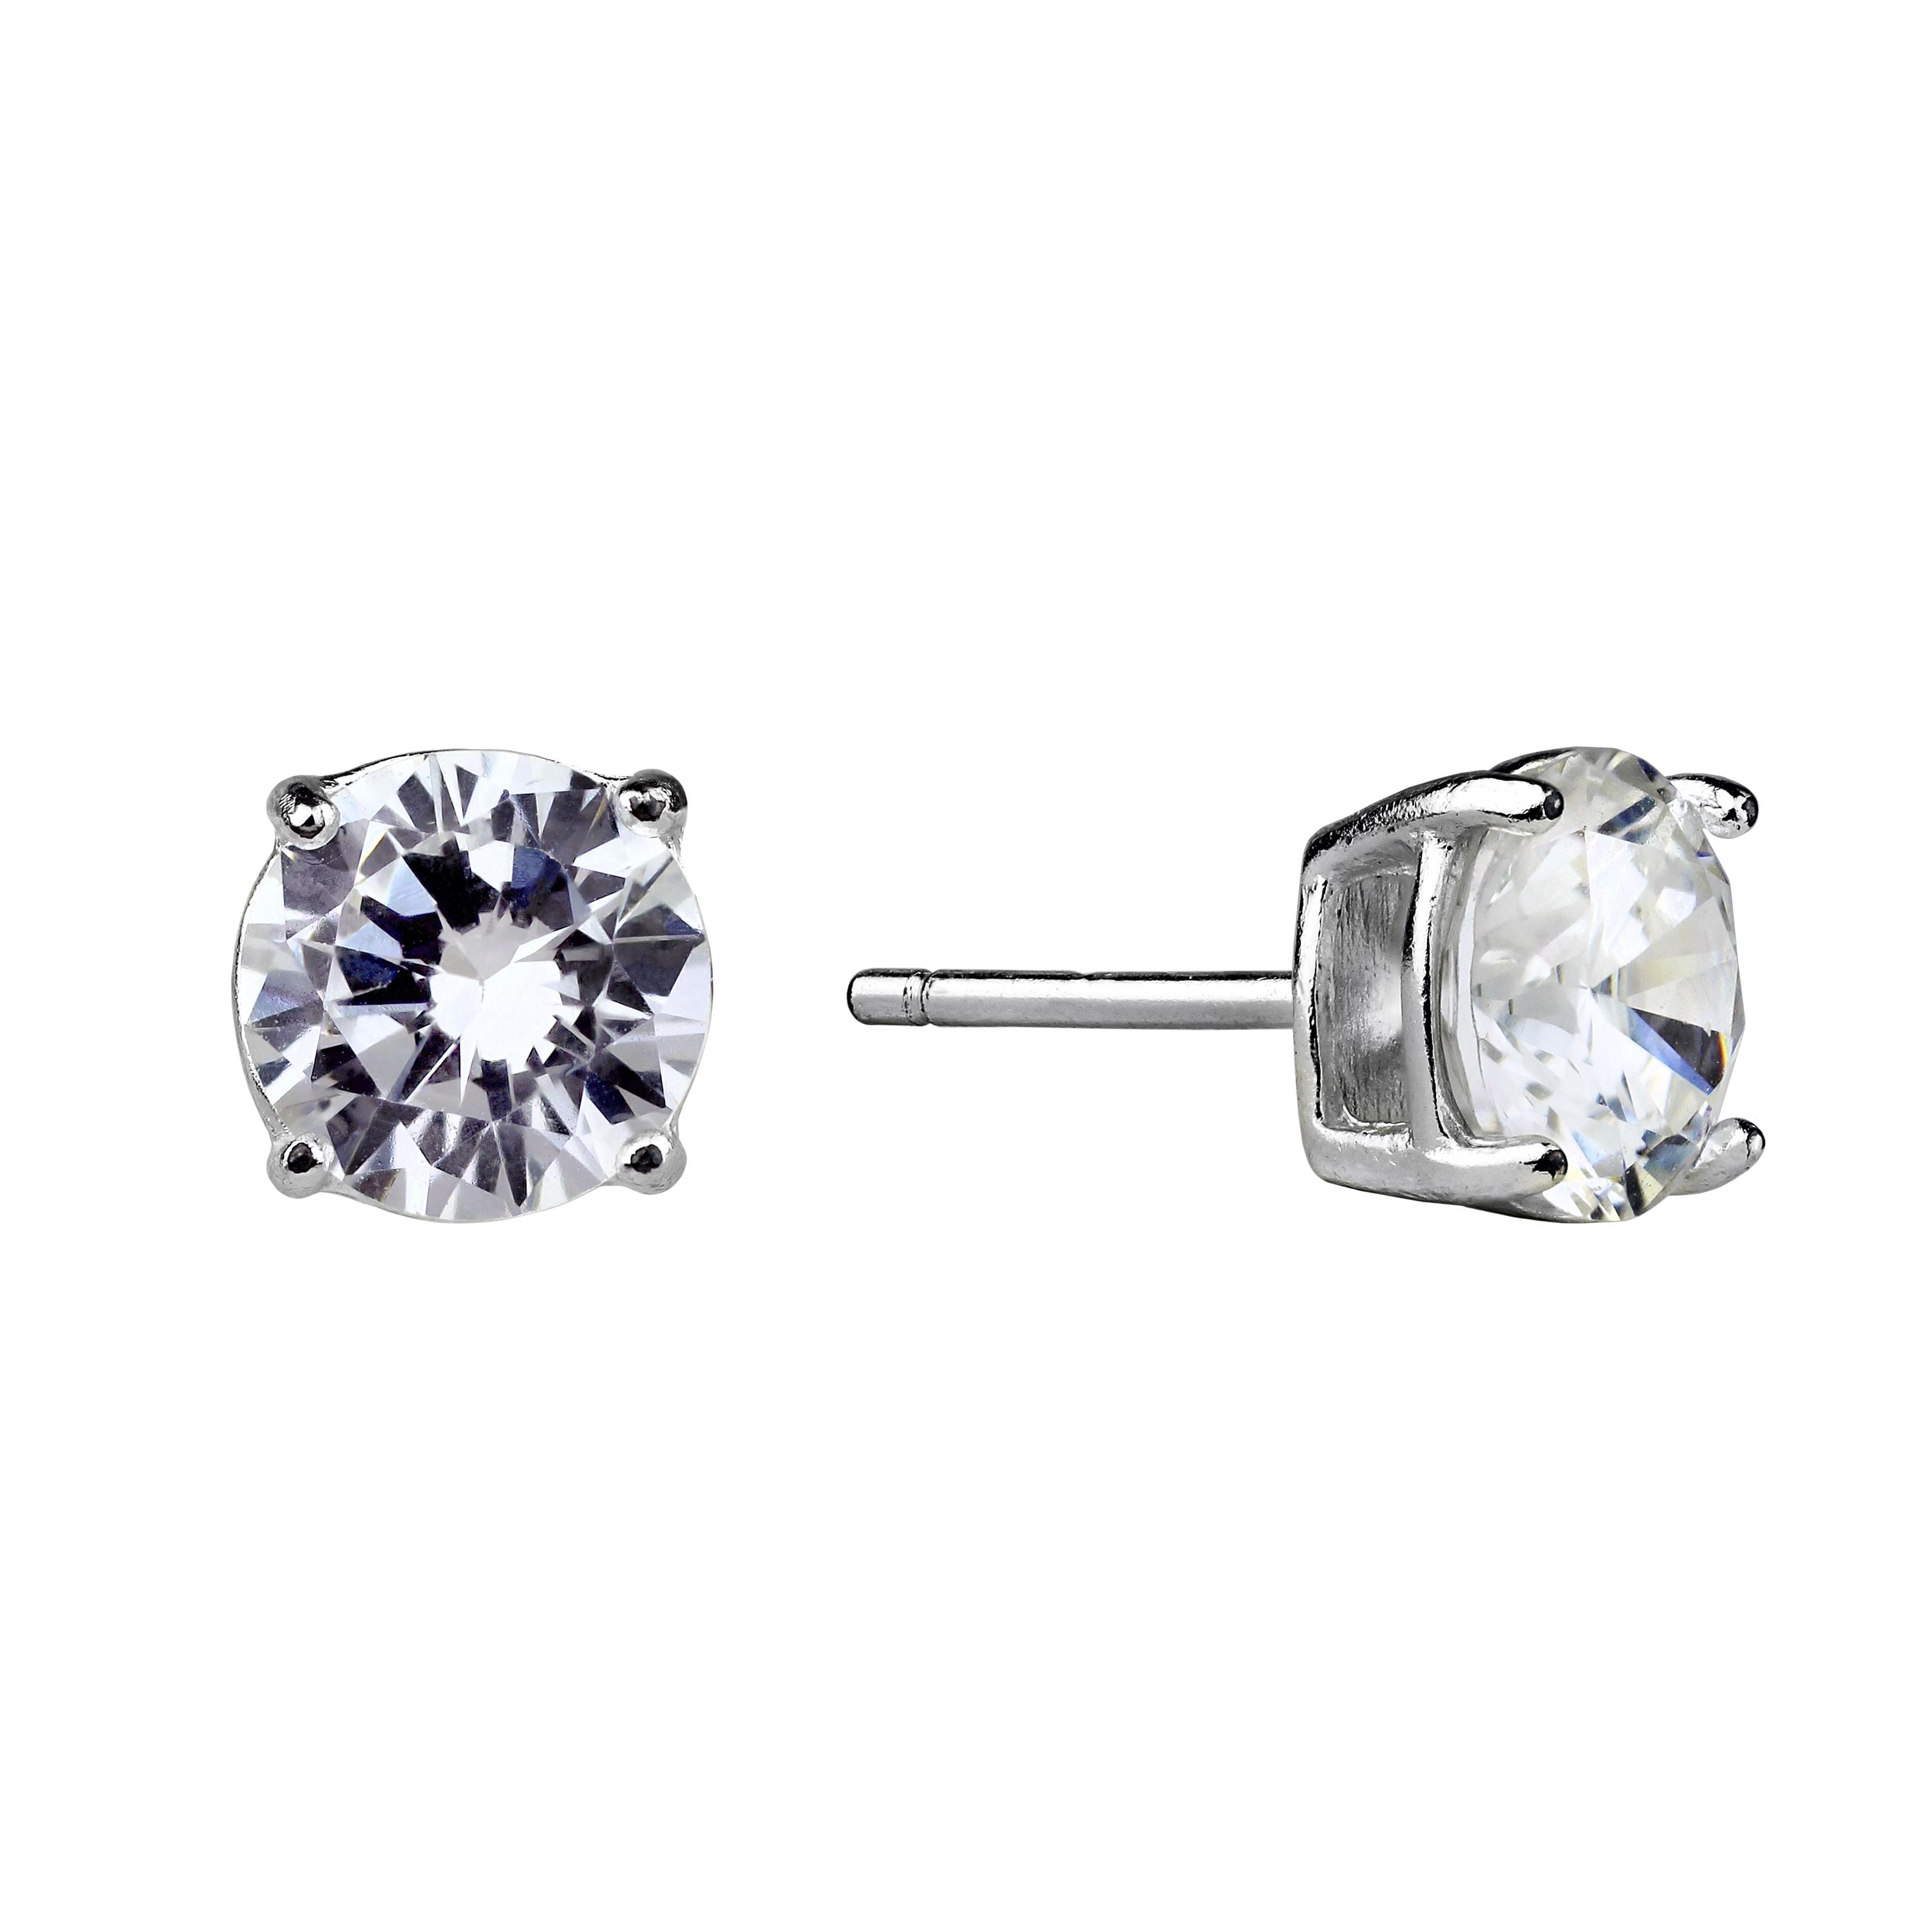 Sterling Silver White Finish Simulated Lab Diamond 4 Prong Square Studs 15mm